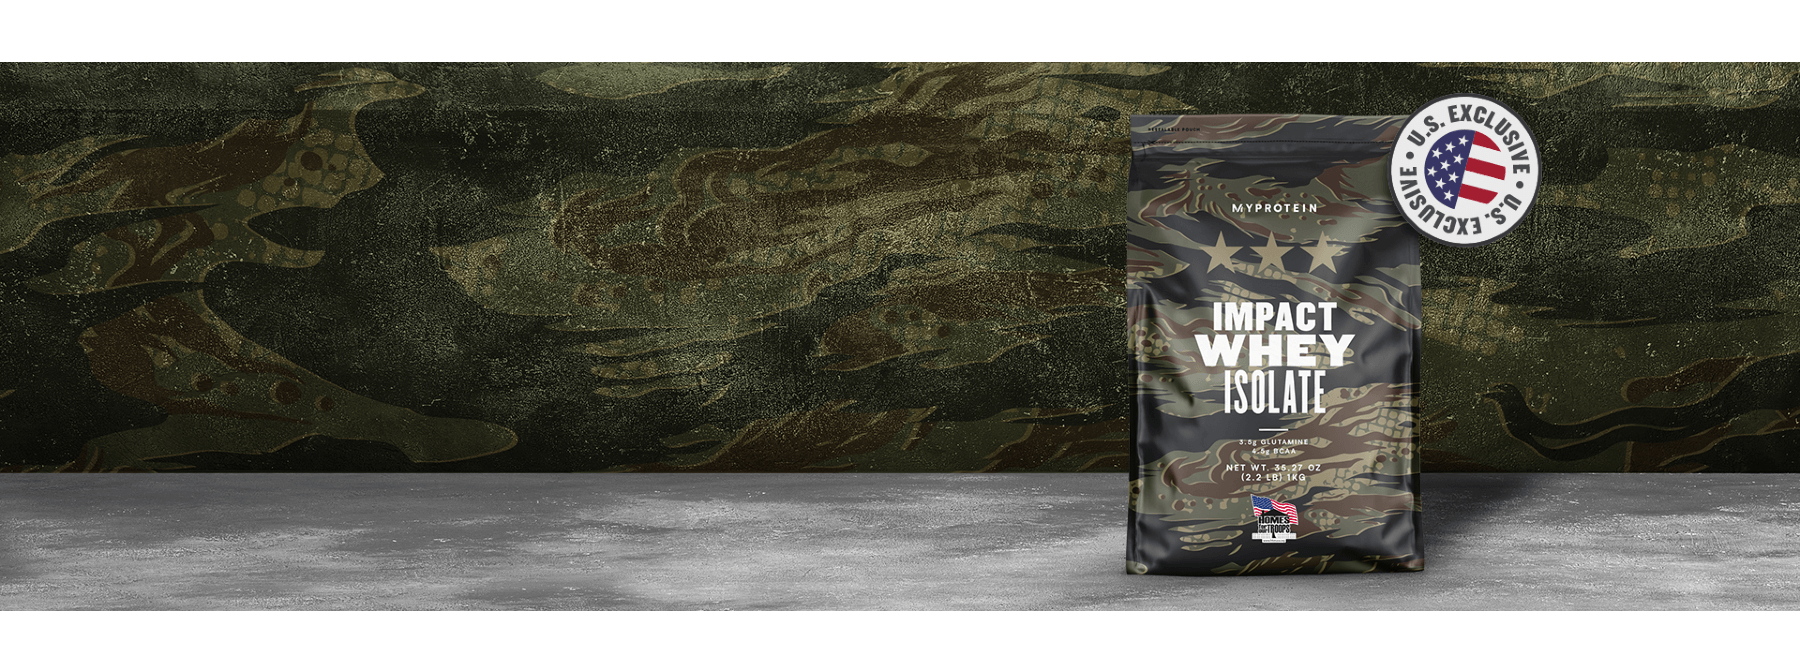 Our Salute To Service This Veteran’s Day | Limited Edition Packaging